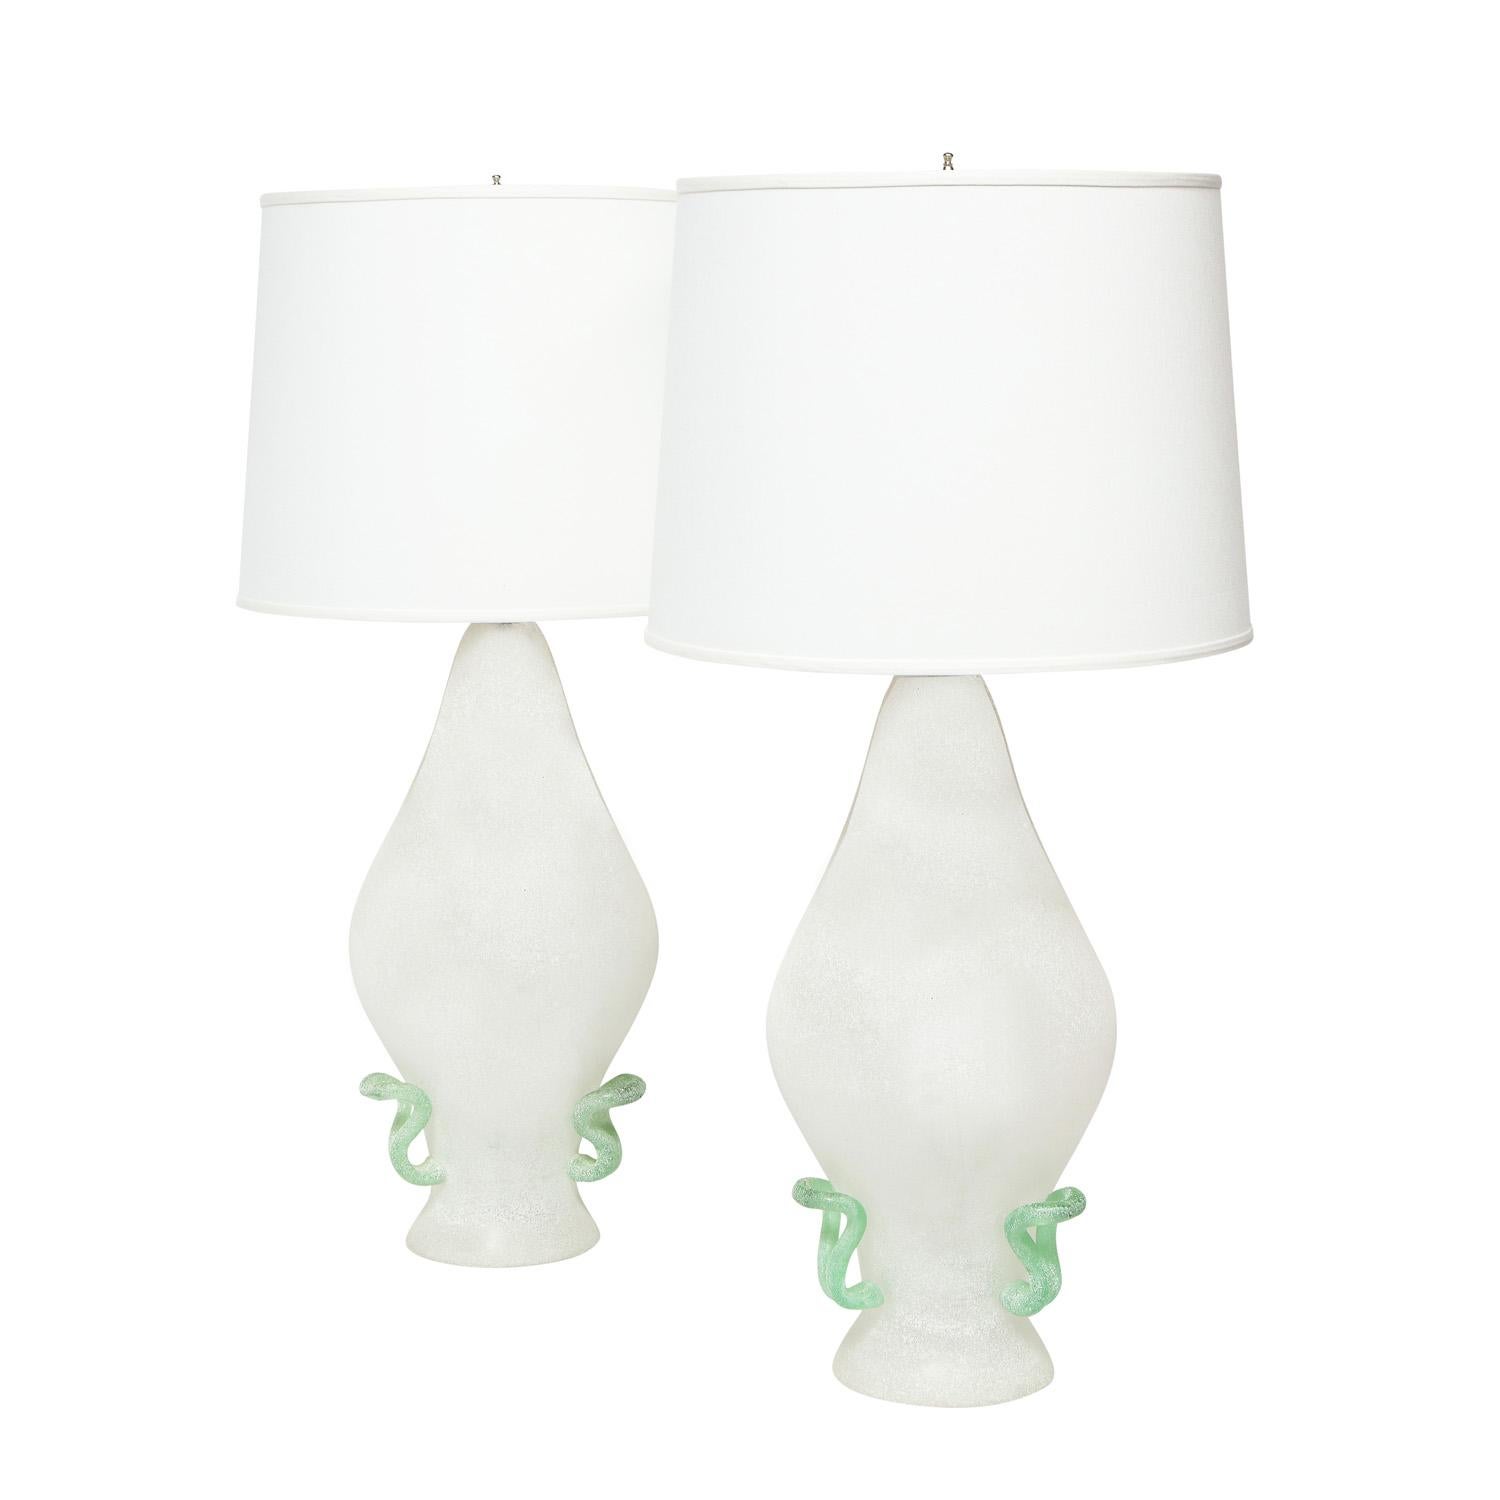 Pair of artisan hand-blown glass table lamps, with white scavo finish and green accents, by Cenedese, Murano Italy, 1970's. The forms and colors are beautiful.

Measures: Shade Diameter: 16 inches
Shade High: 12 inches.